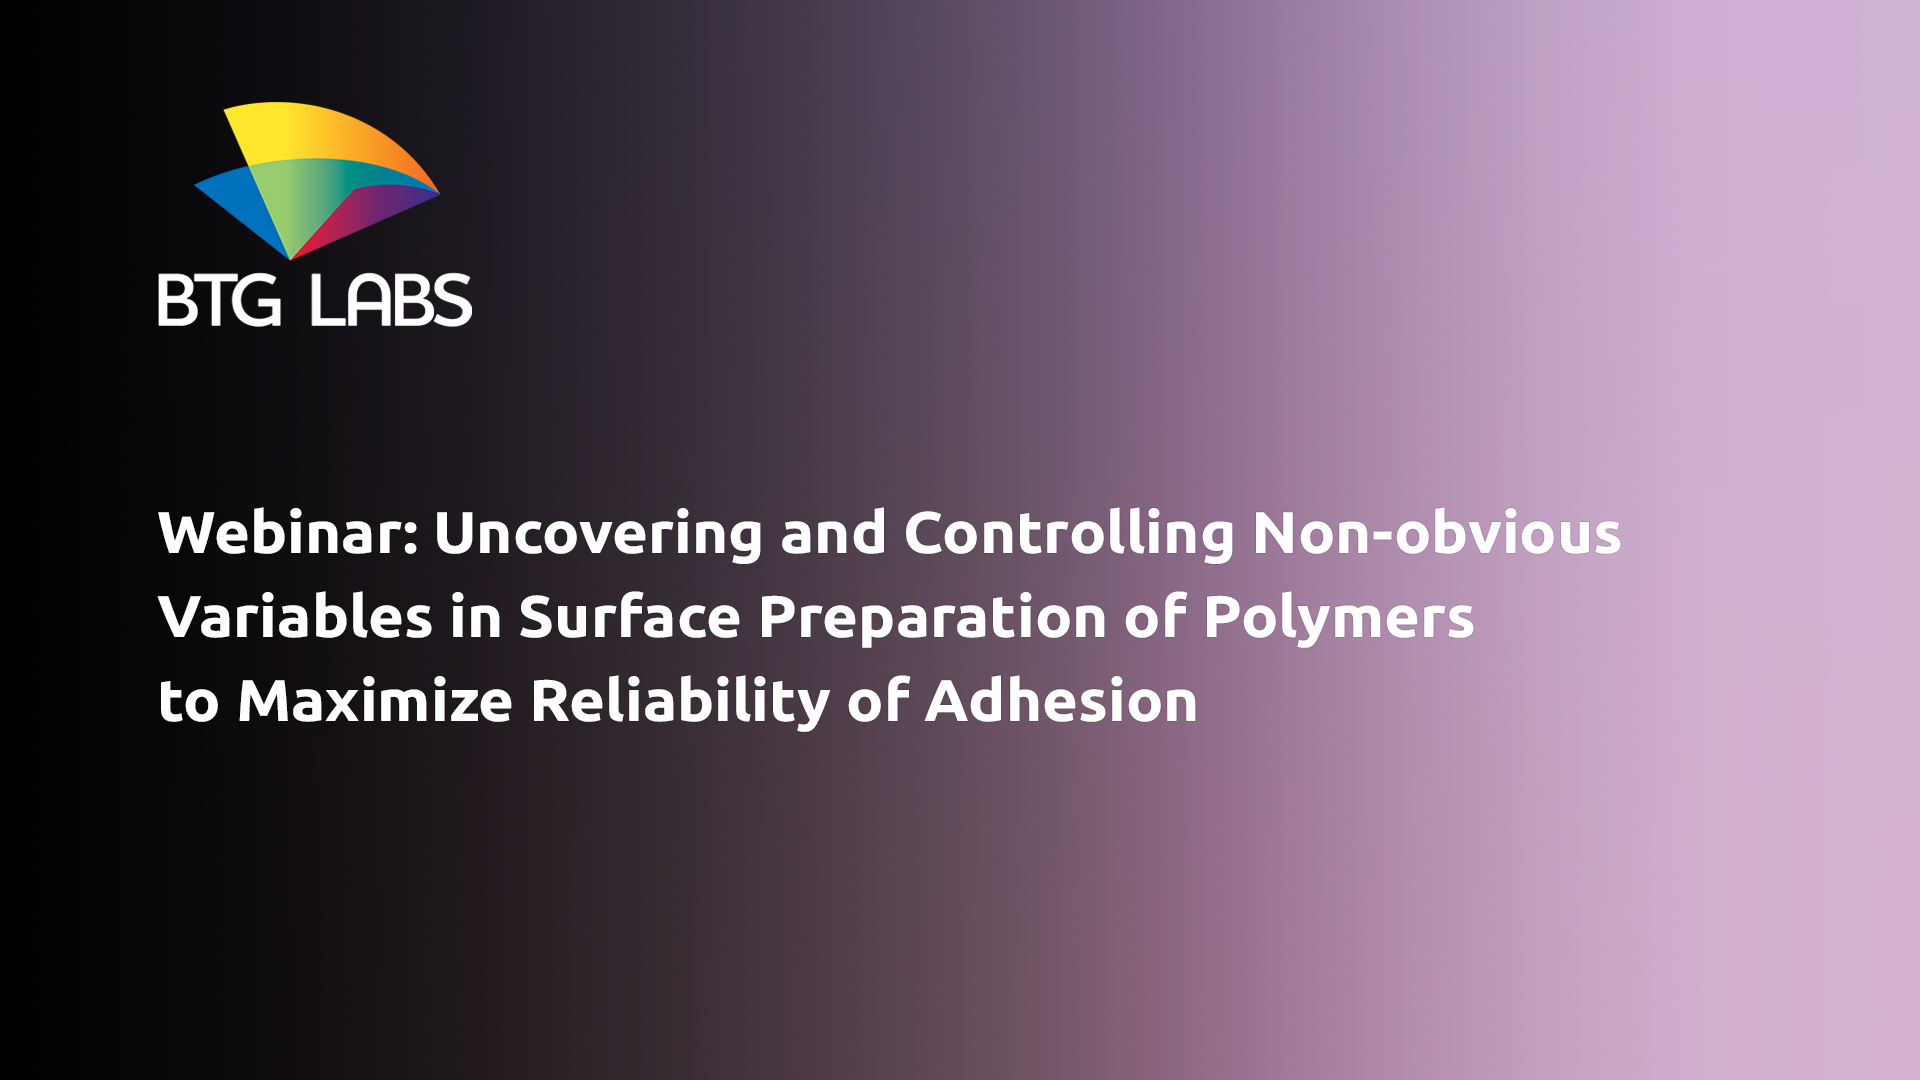 Webinar: Uncovering and Controlling  Non-obvious Variables in Surface Preparation of Polymers to Maximize Reliability of Adhesions